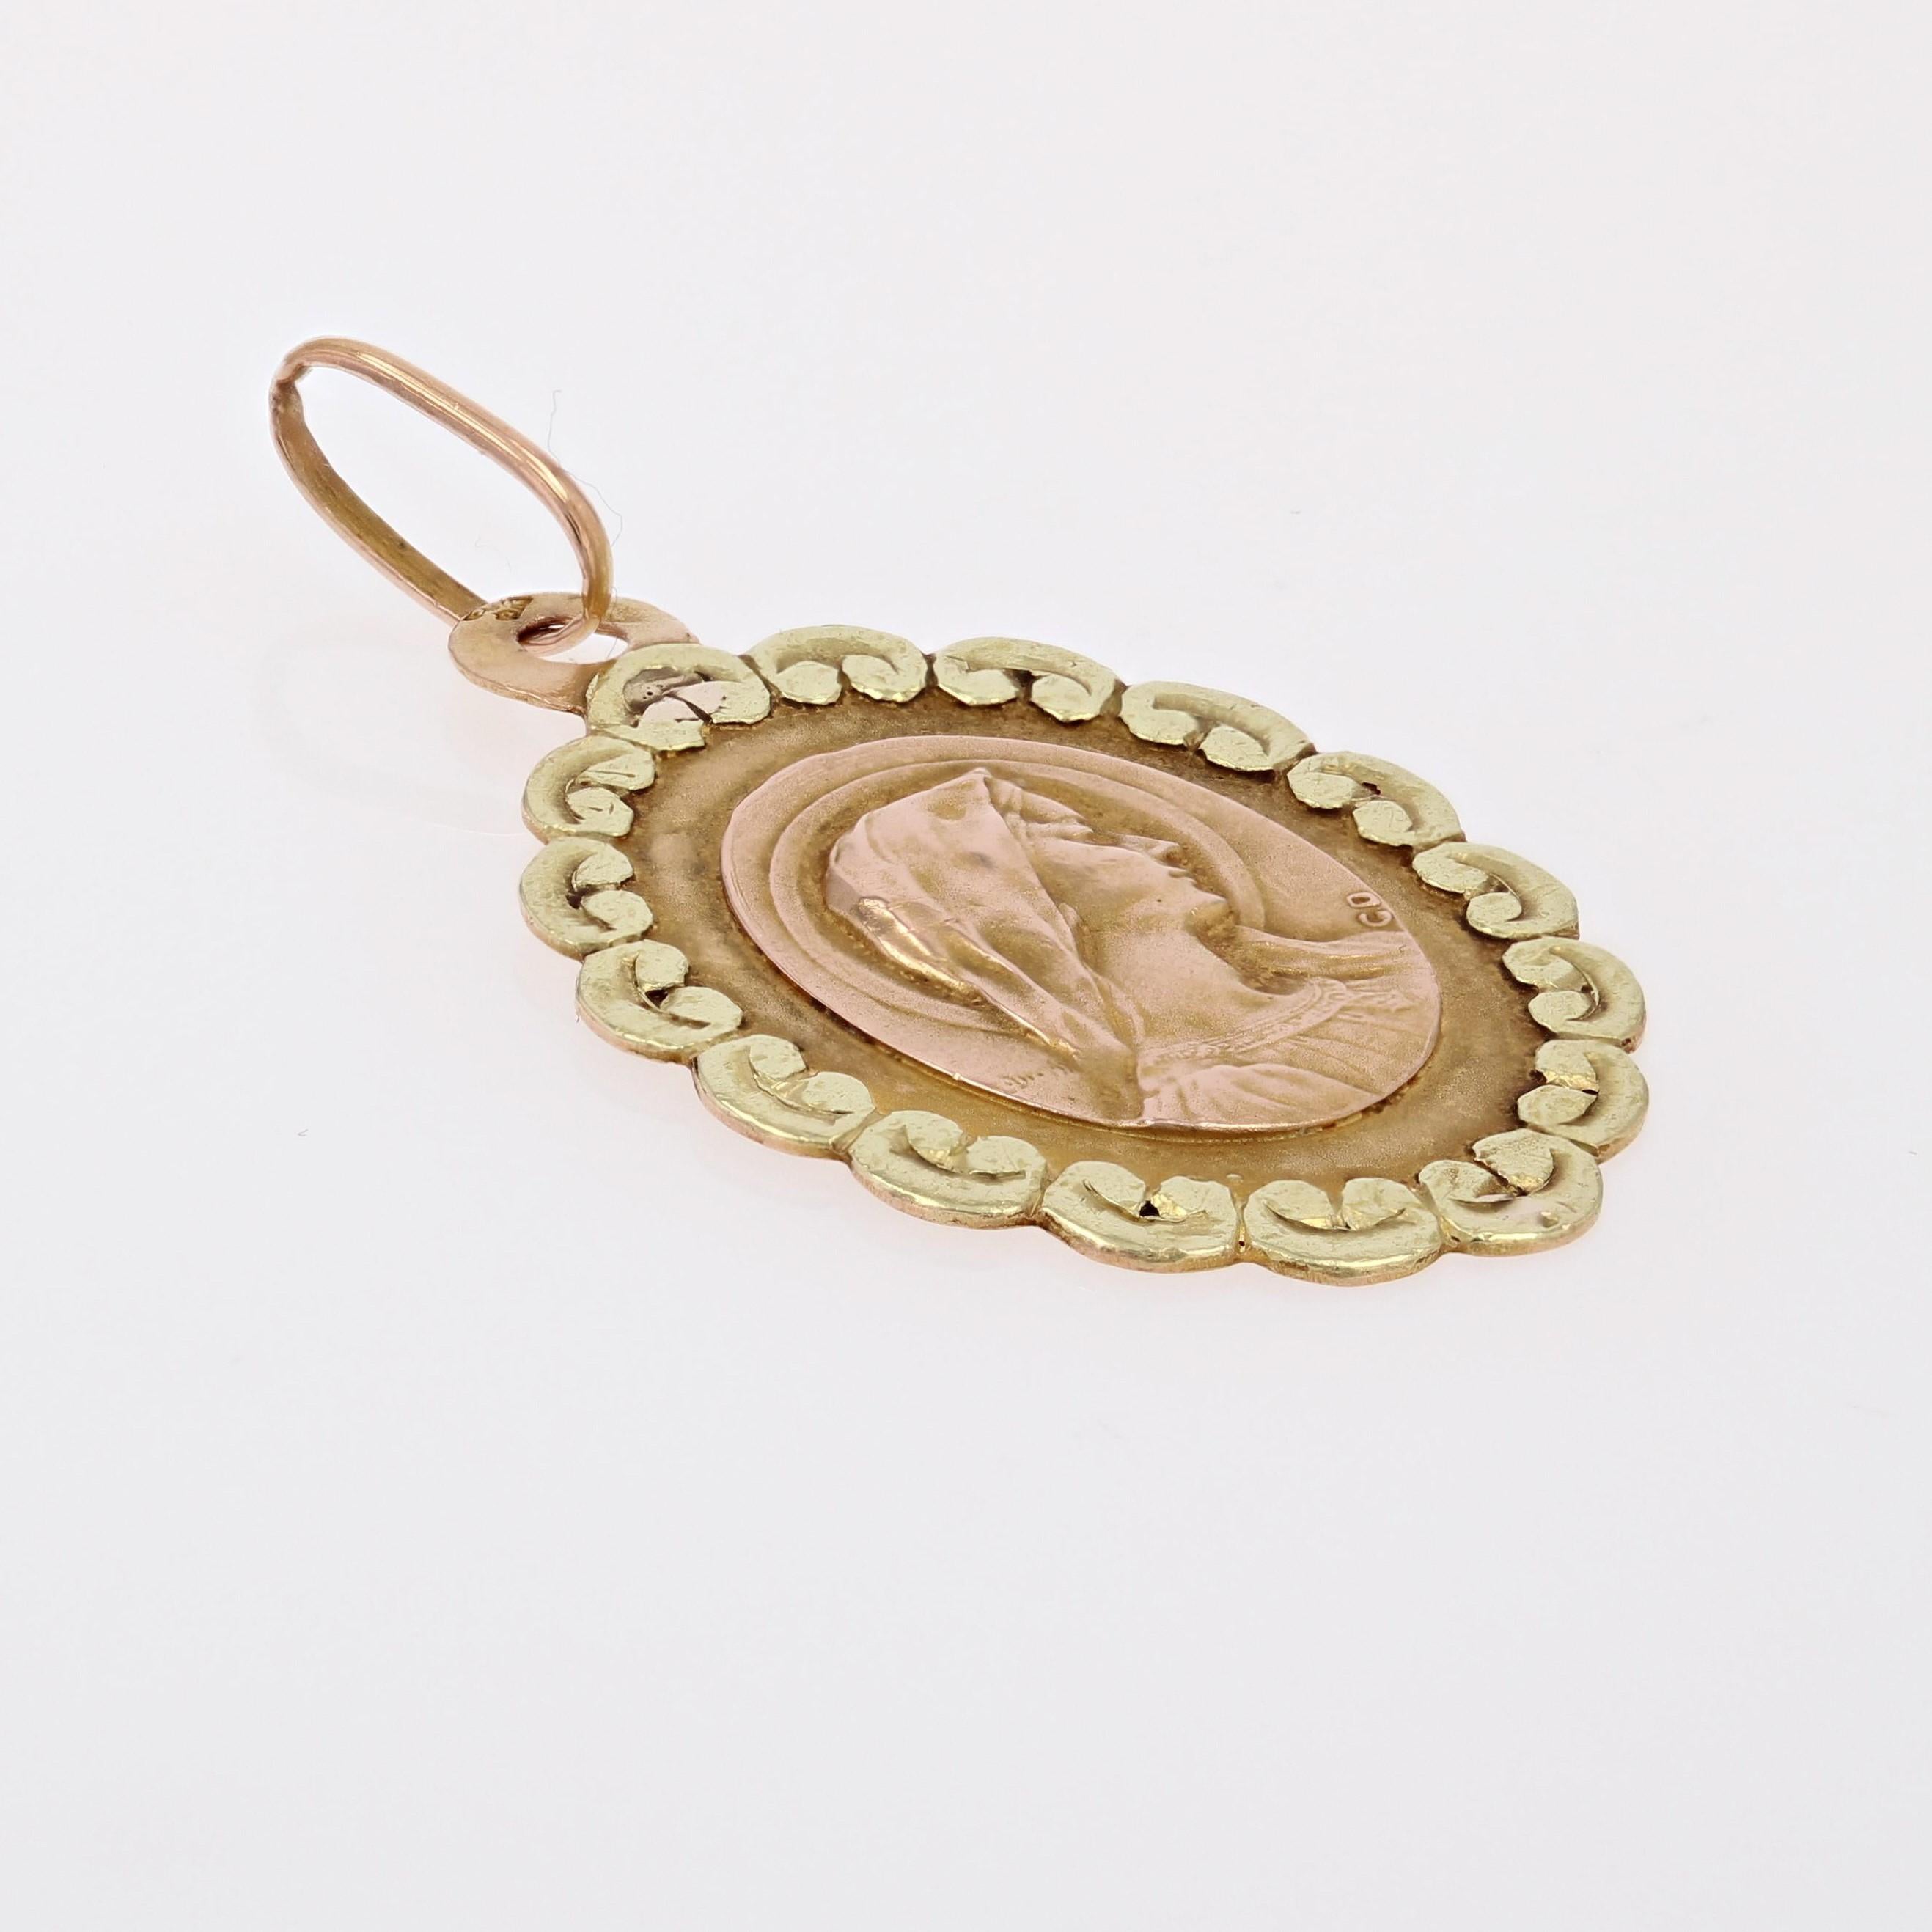 Medal in 18 karat rose and yellow gold, eagle head hallmark.
Charming oval medal in rose gold, it presents in its center the profile of the Virgin Mary haloed and bordered with polylobed patterns in yellow gold.
The back of this antique pendant is